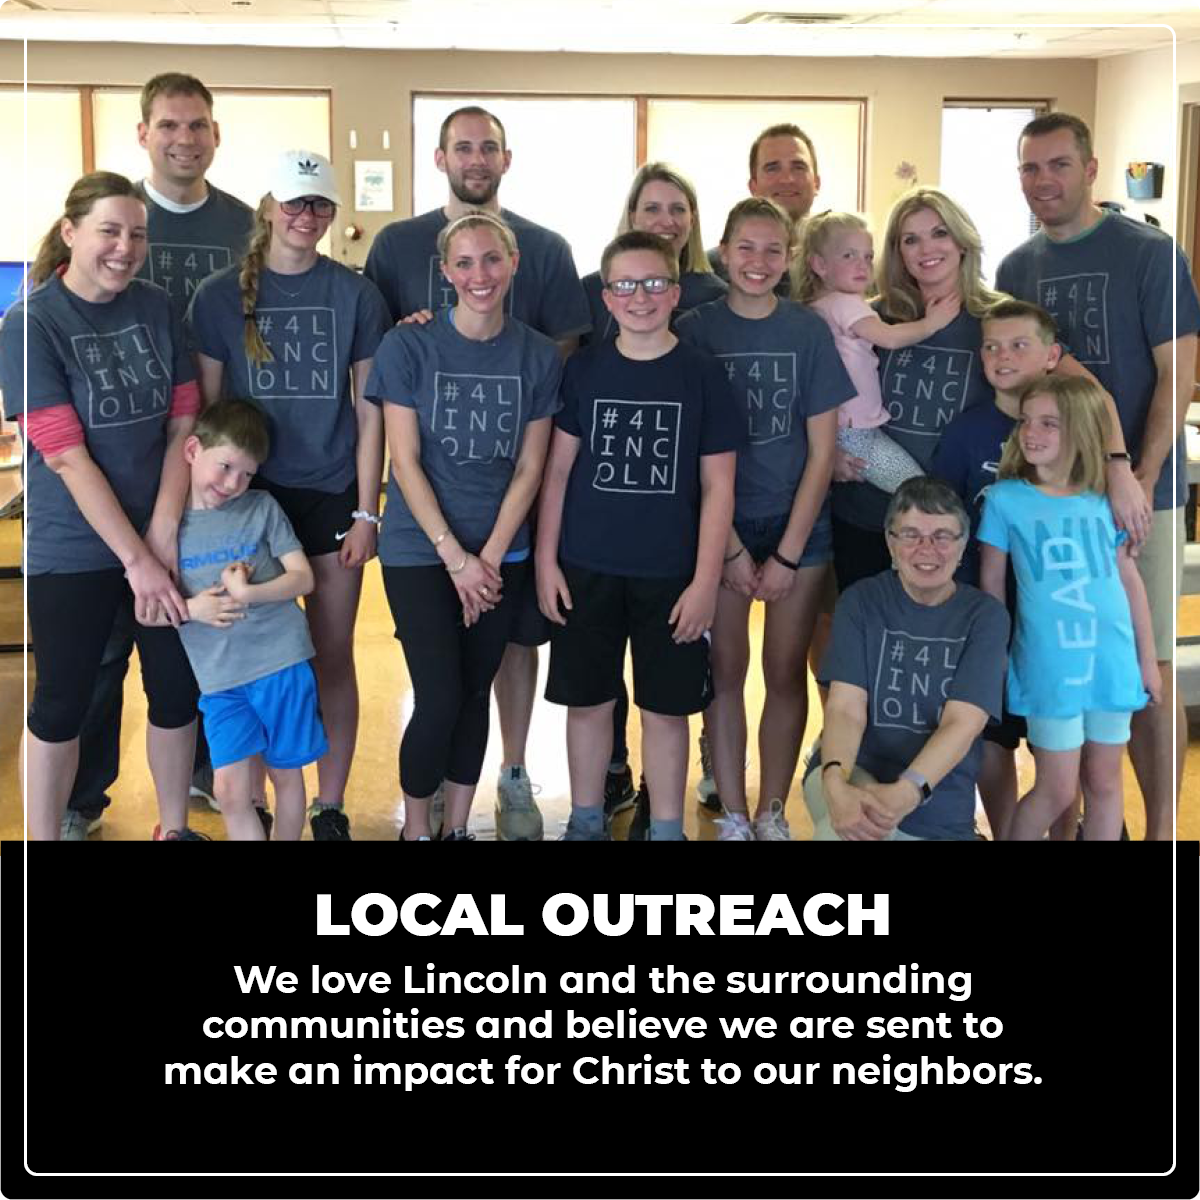 Local outreach: We love Lincoln and the surrounding communities and believe we are sent to make an impact for Christ to our neighbors.